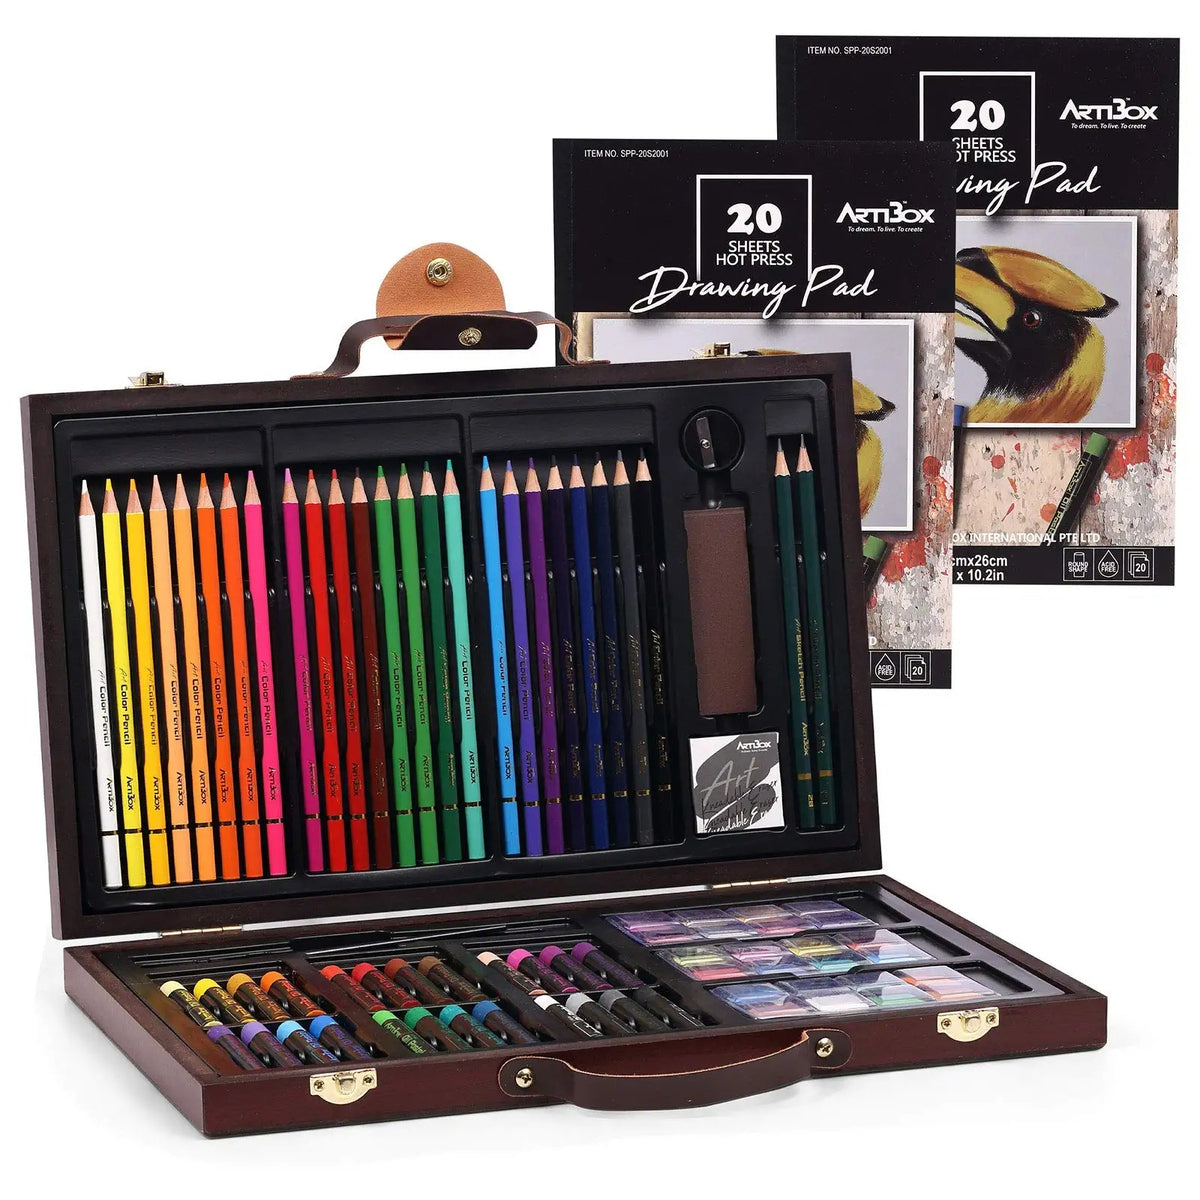  H & B 208-Piece Art Supplies Kit for Painting & Drawing,Kids Art  Set Case, Portable Art Box, Oil Pastels, Crayons, Colored Pencils, Markers,  Great Gift for Kids, Girls, Boys, Teens